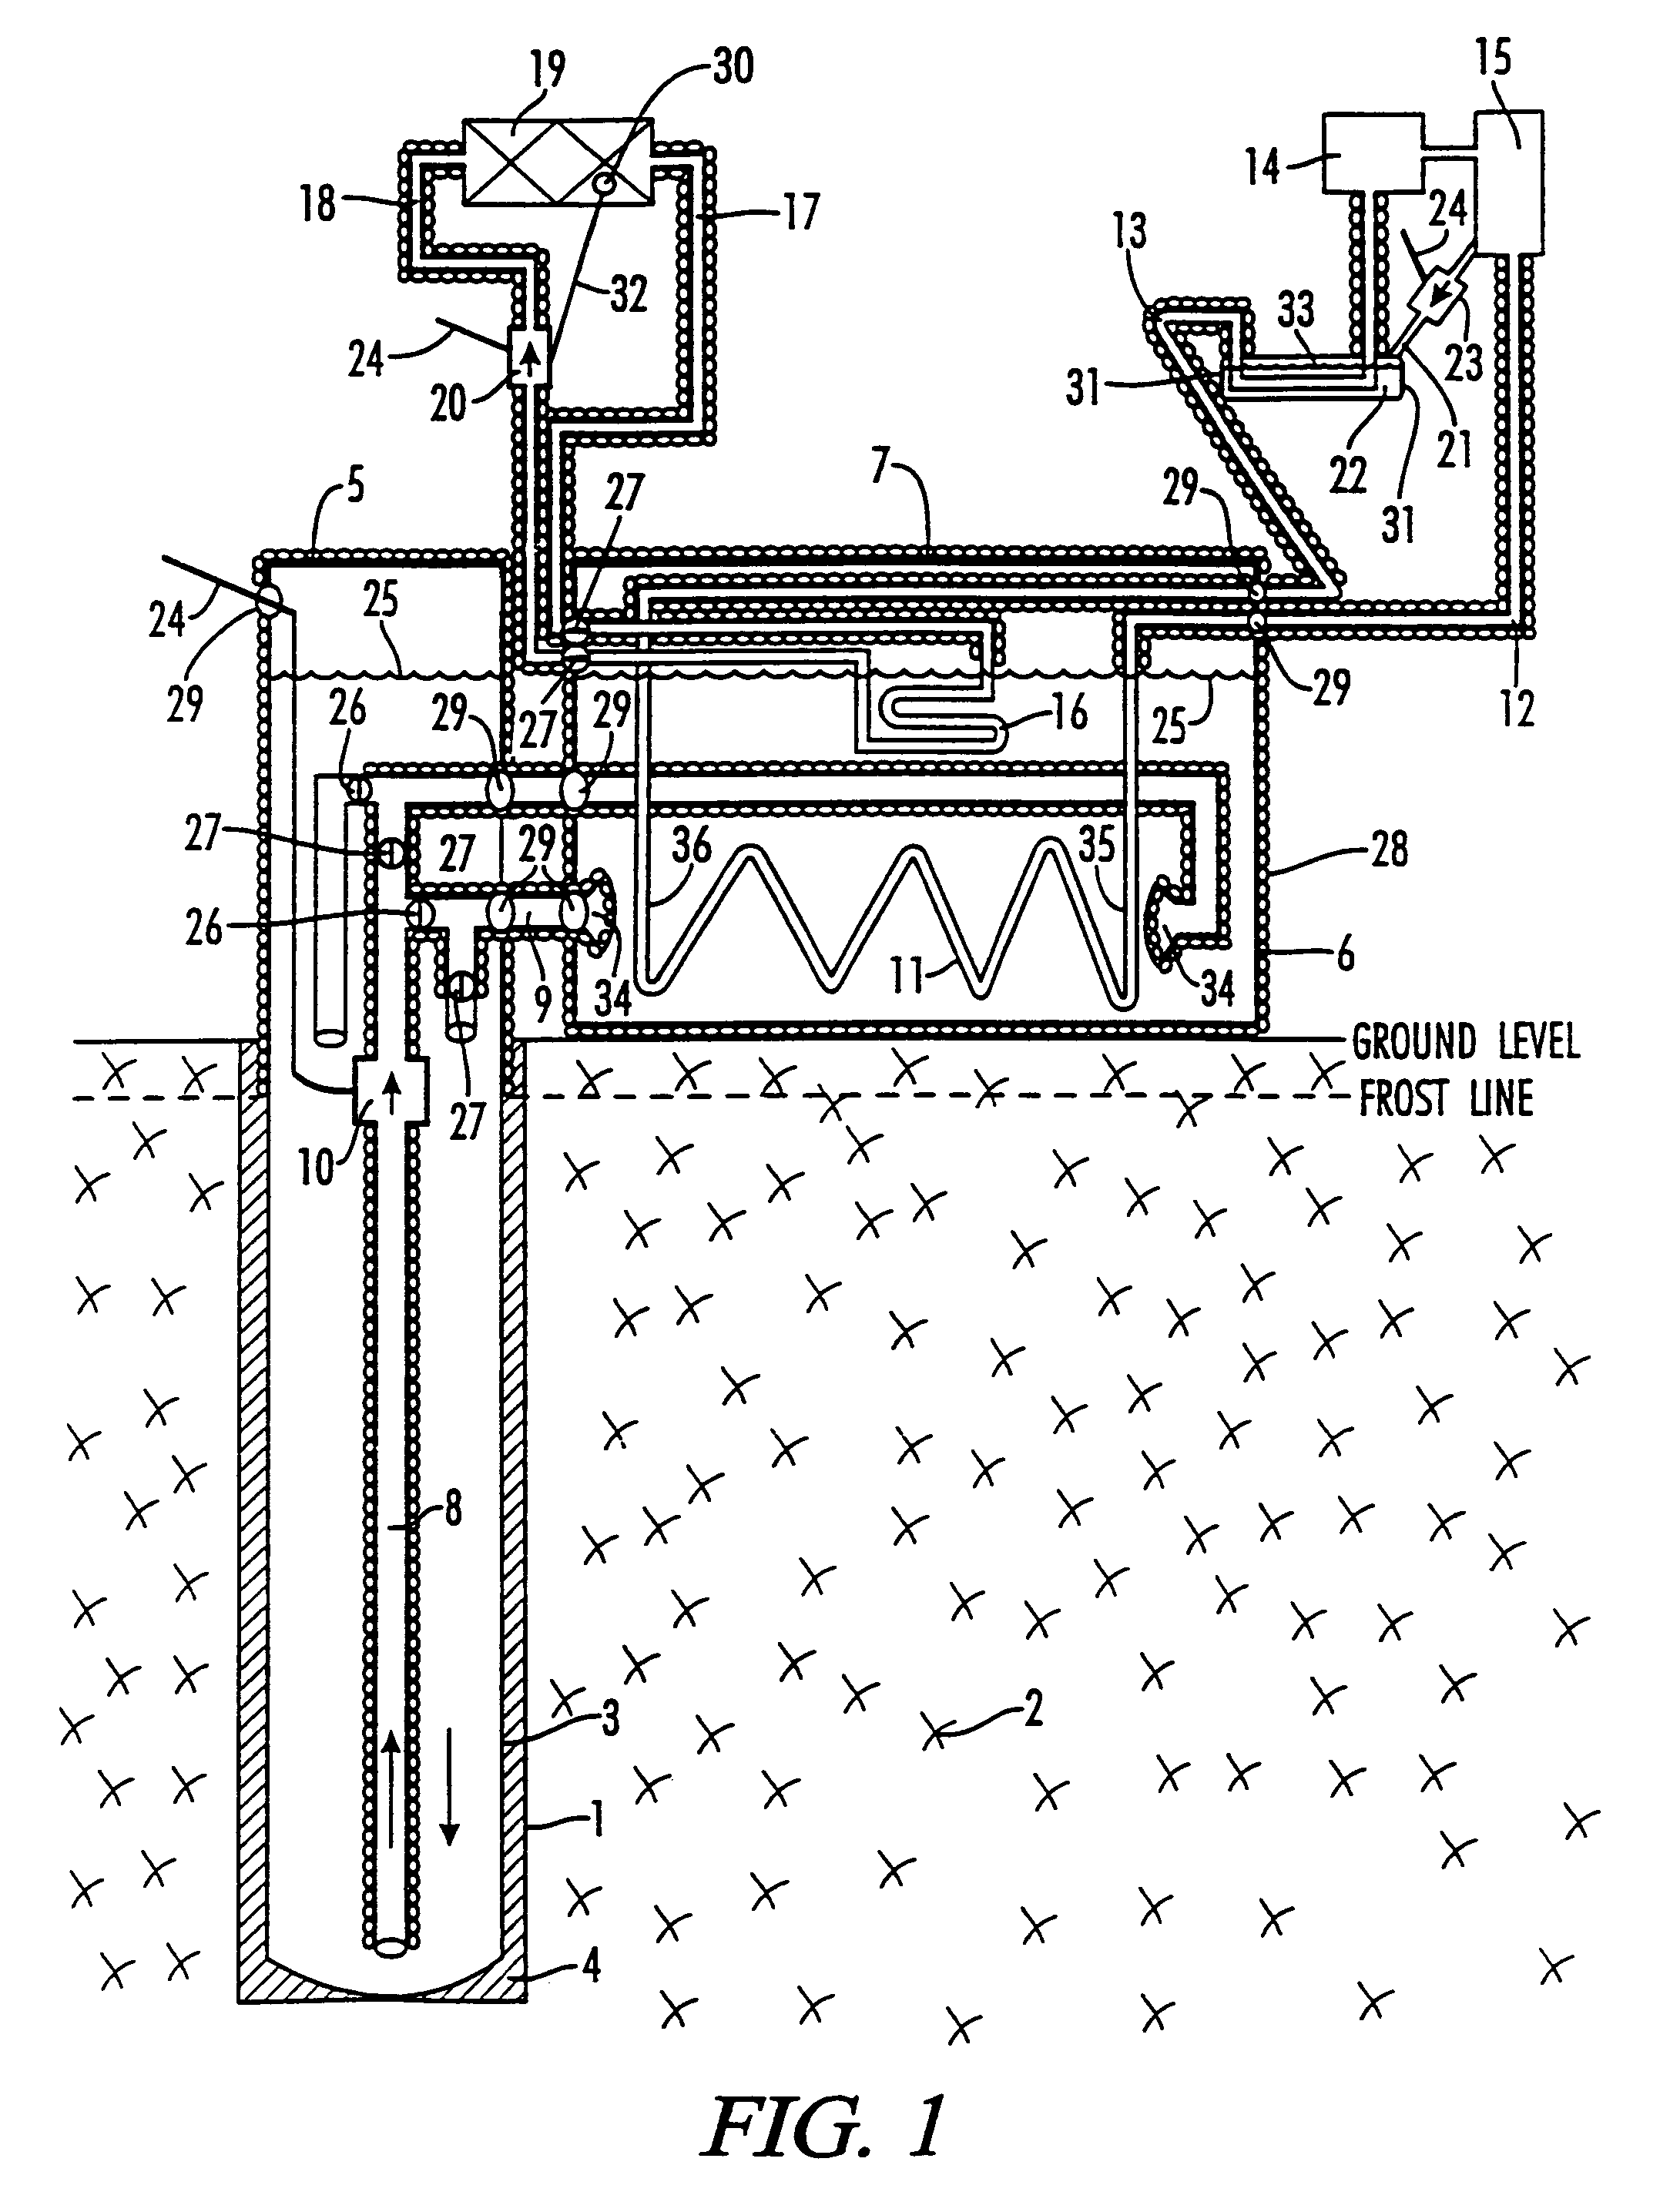 Geothermal heating and cooling system with solar heating